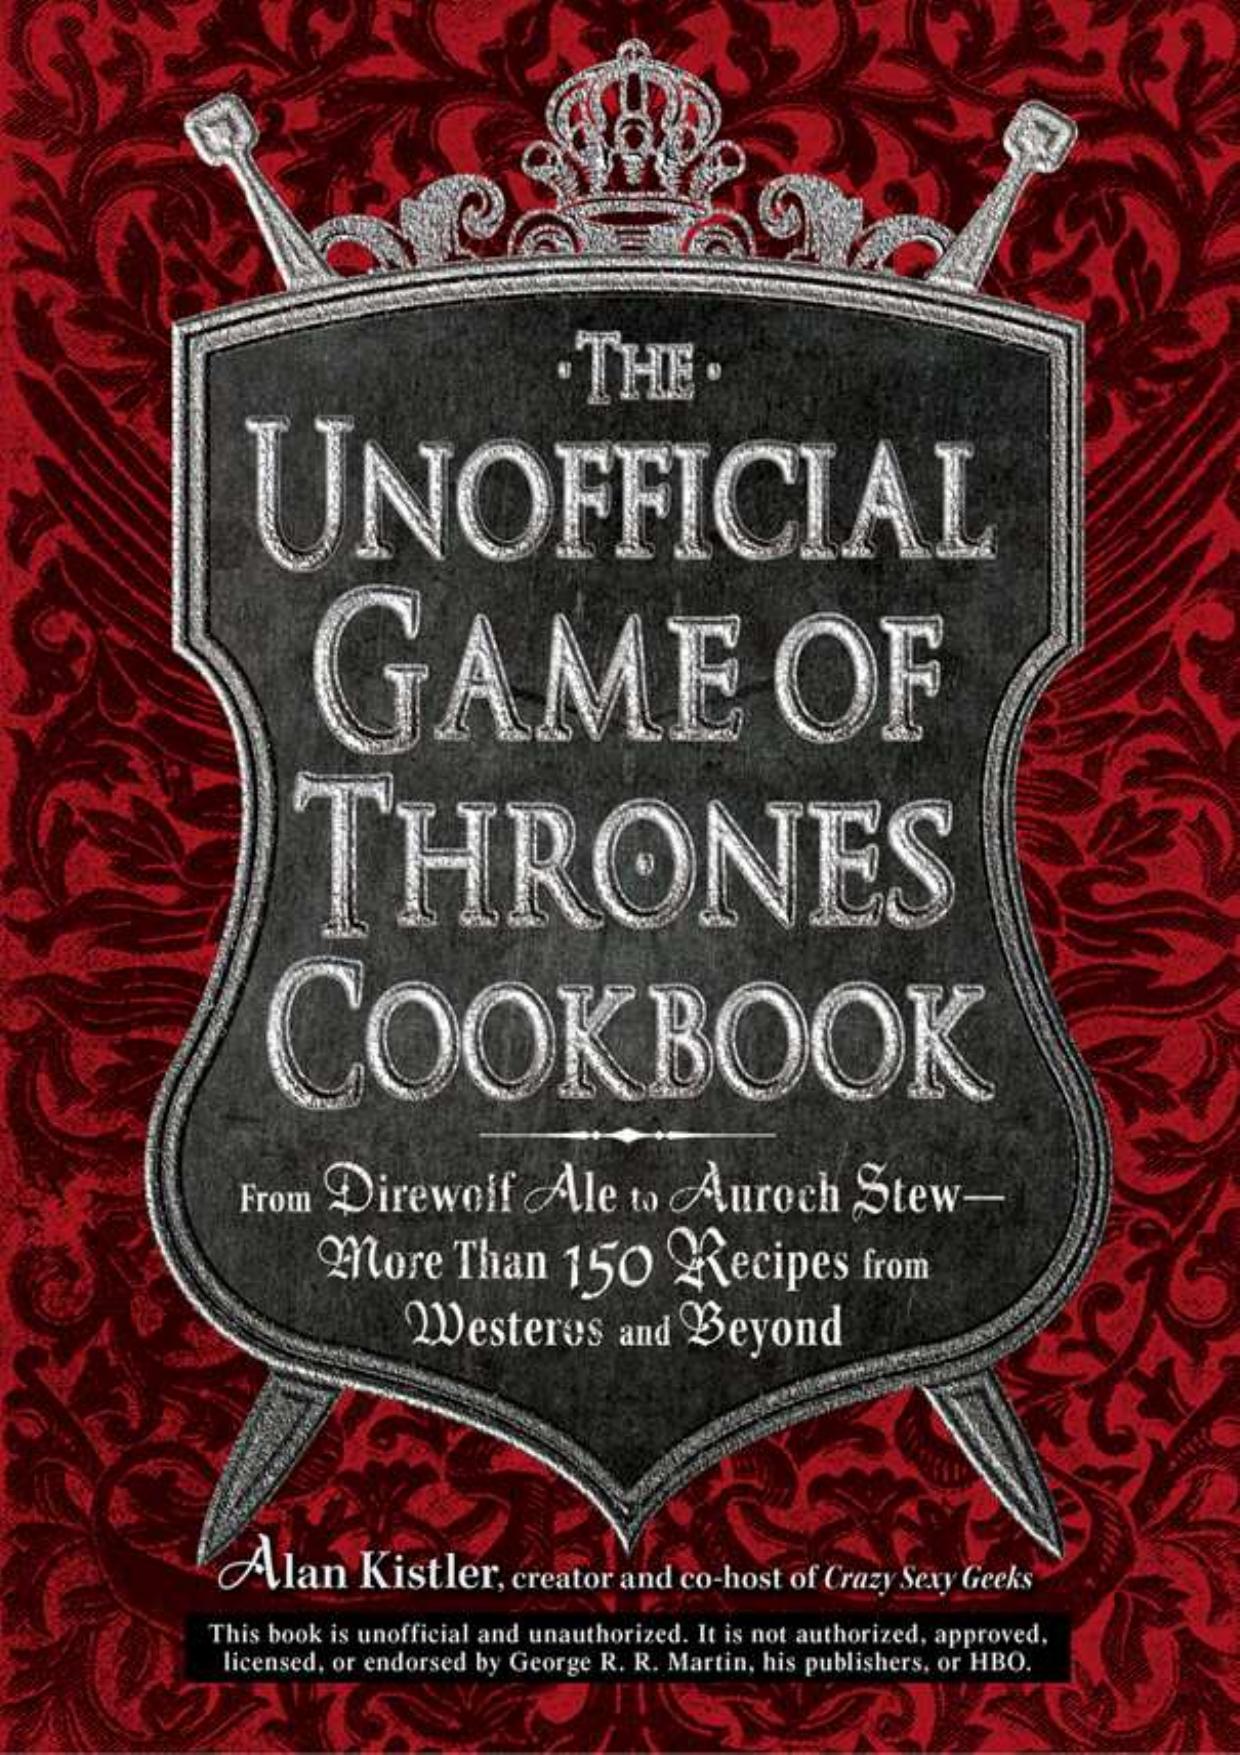 The Unofficial Game of Thrones Cookbook: From Direwolf Ale to Auroch Stew - More Than 150 Recipes from Westeros and Beyond (Unofficial Cookbook)